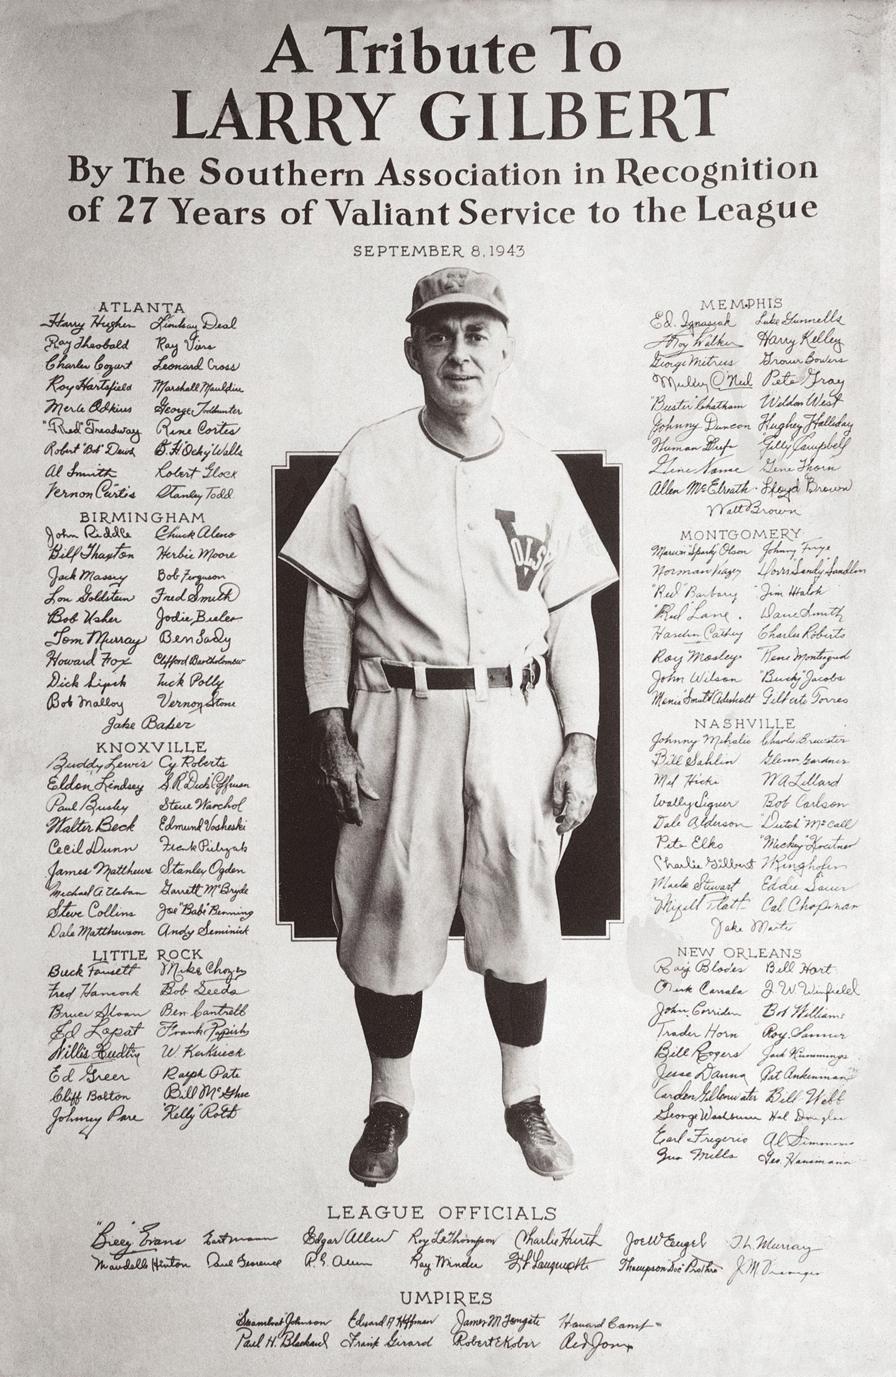 1943 tribute to longtime Southern Association player and manager Larry Gilbert.